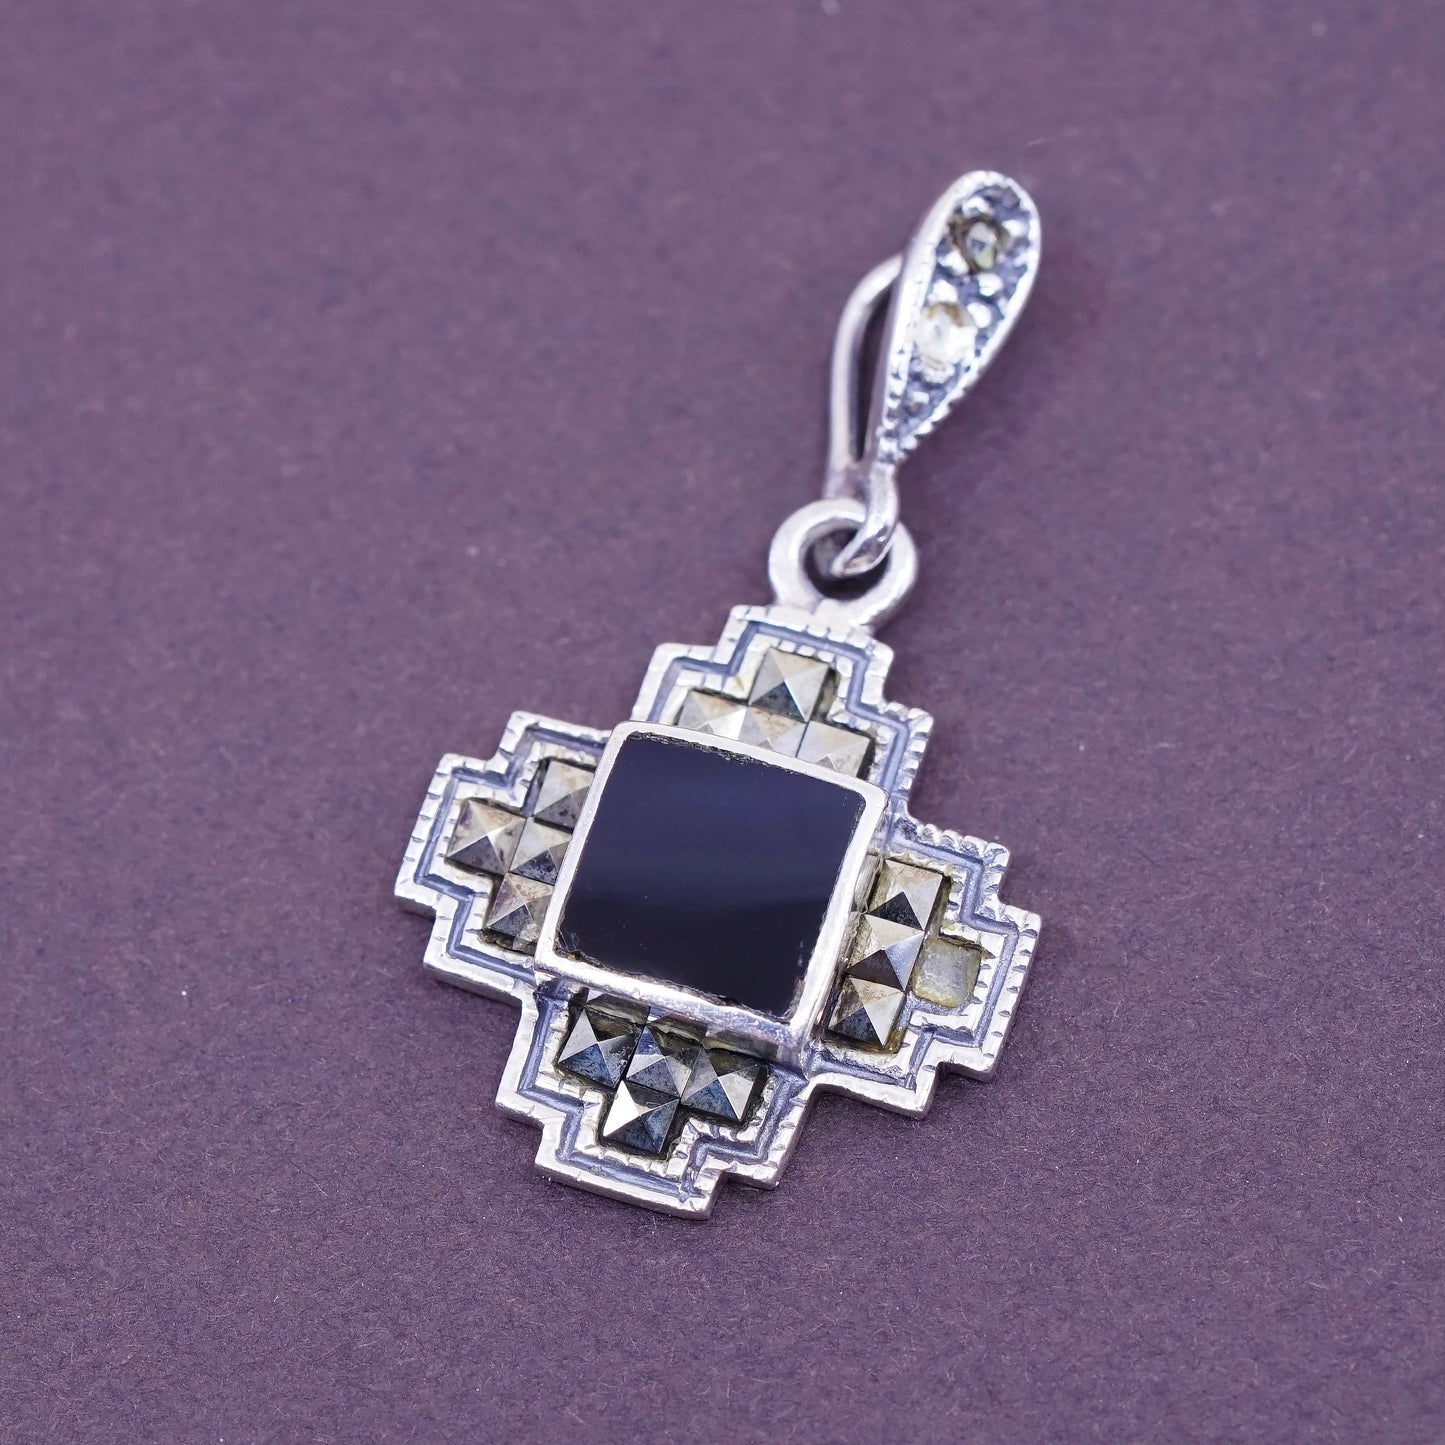 Vintage Sterling 925 silver handmade sided pendant with obsidian and marcasite